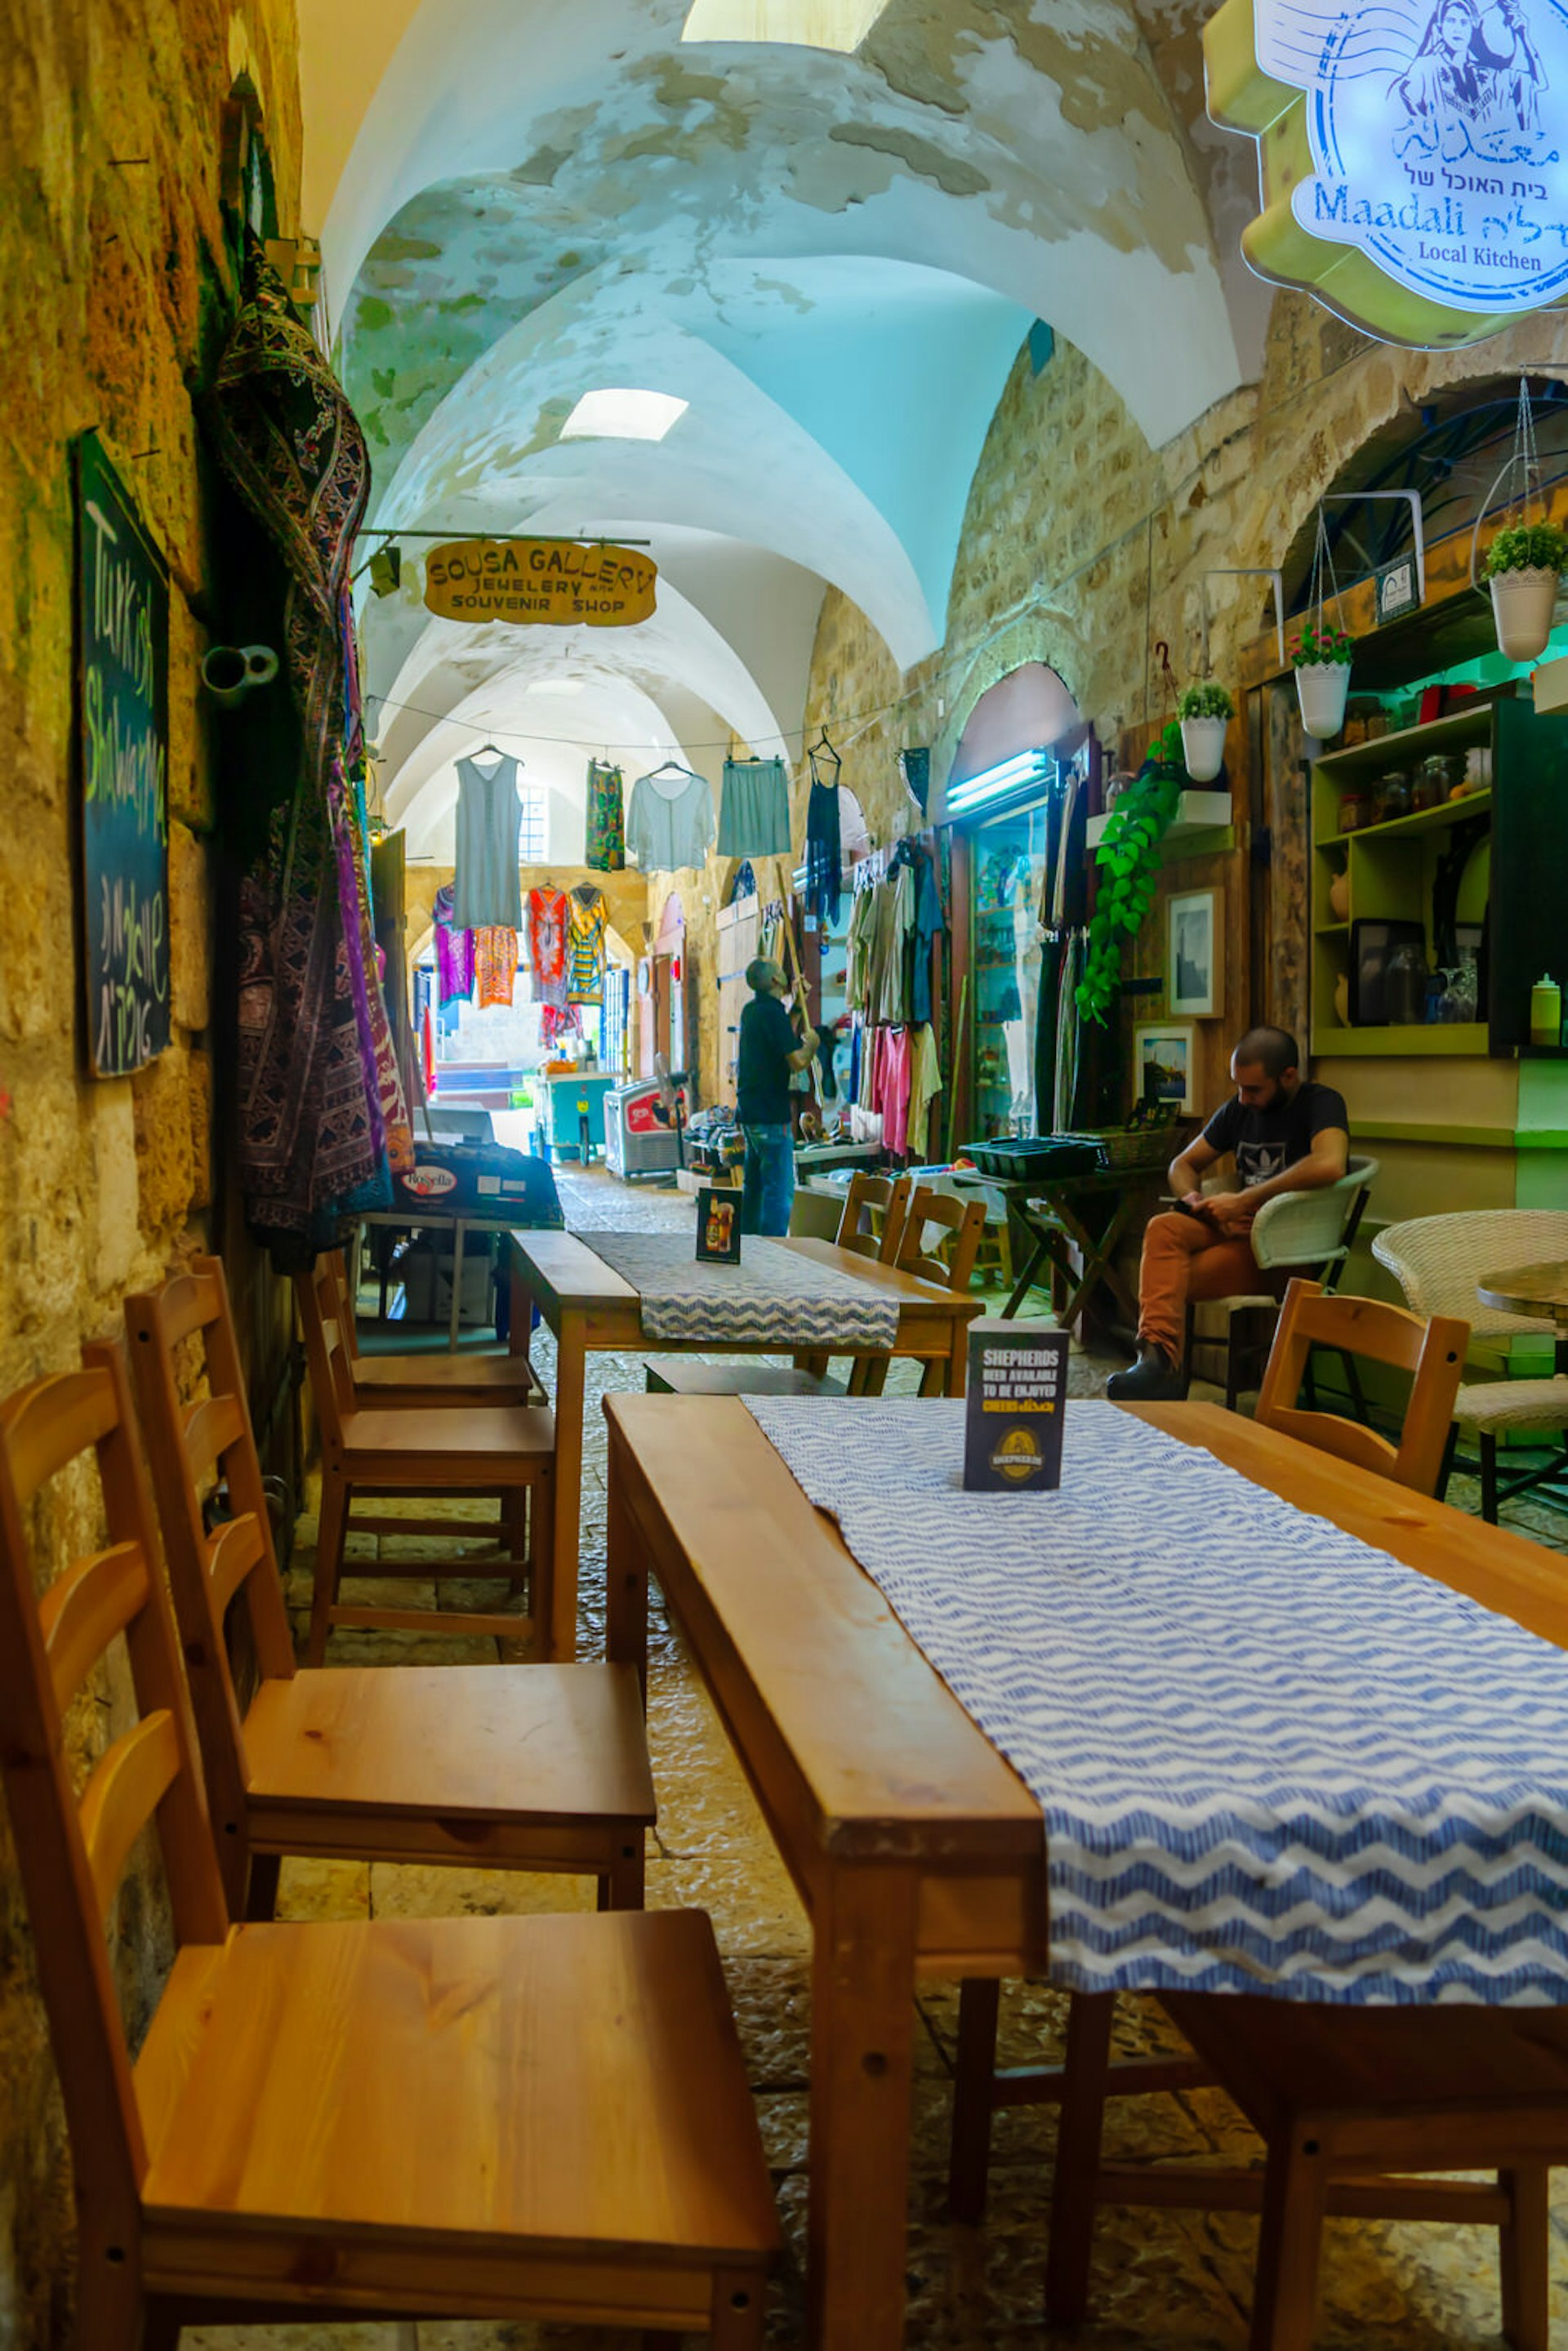 Scene of the Turkish Bazaar, with local businesses, locals and tourists, in the old city of Akko, Israel. It is a restored old covered market © RnDmS / Getty Images